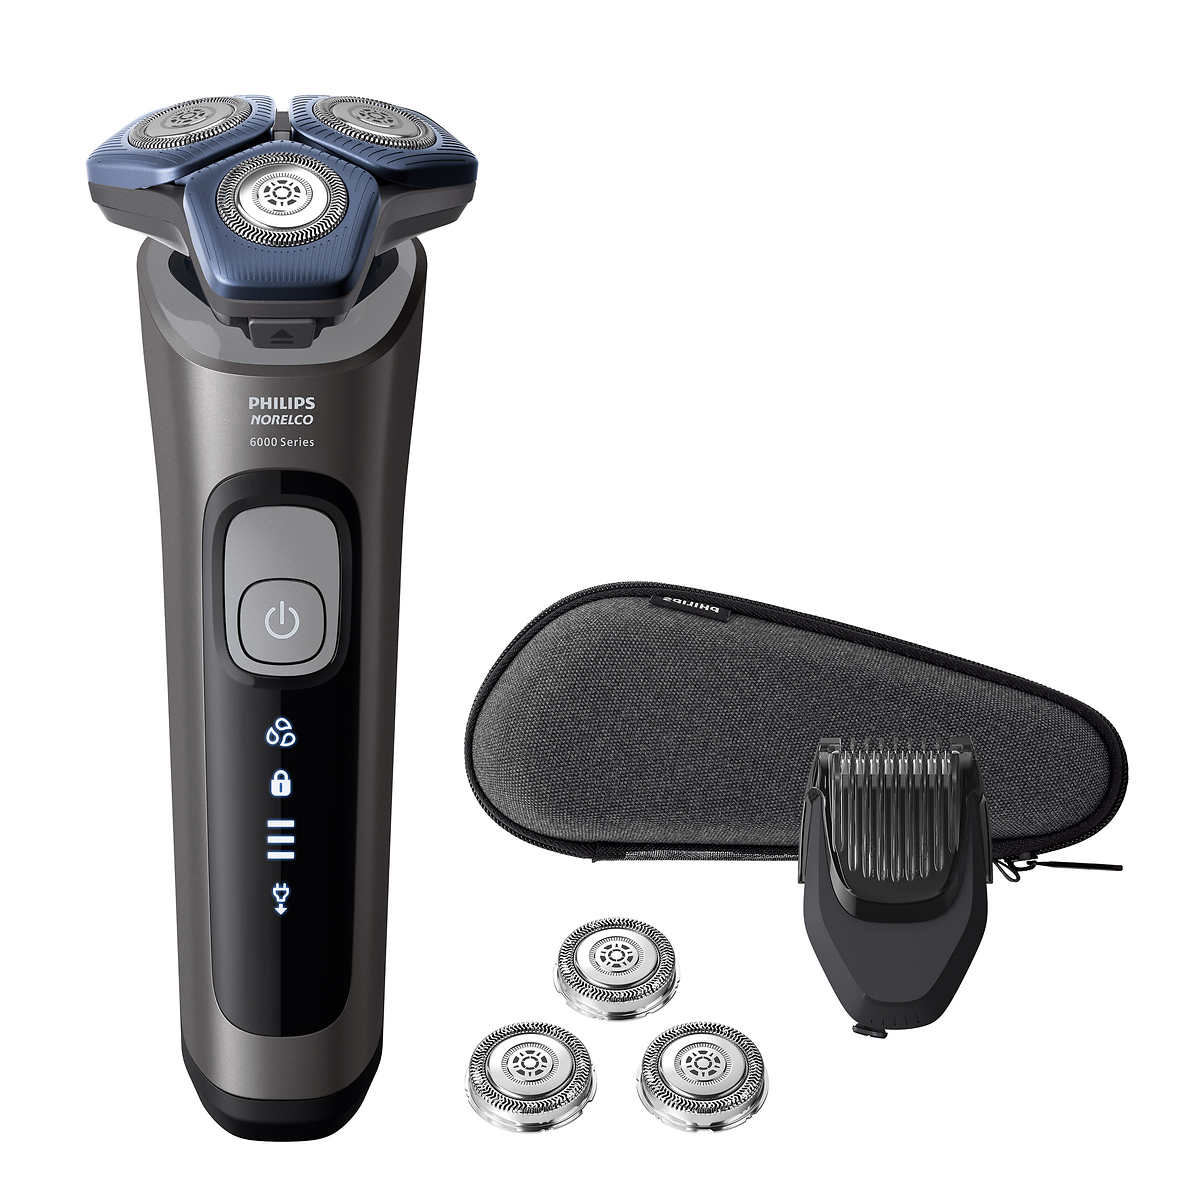 Costco: Philips Norelco Shaver 6800 with SenseIQ Technology, Series 6000 warehouse $70 online $75 with free shipping 5-15 thru 6-9-24